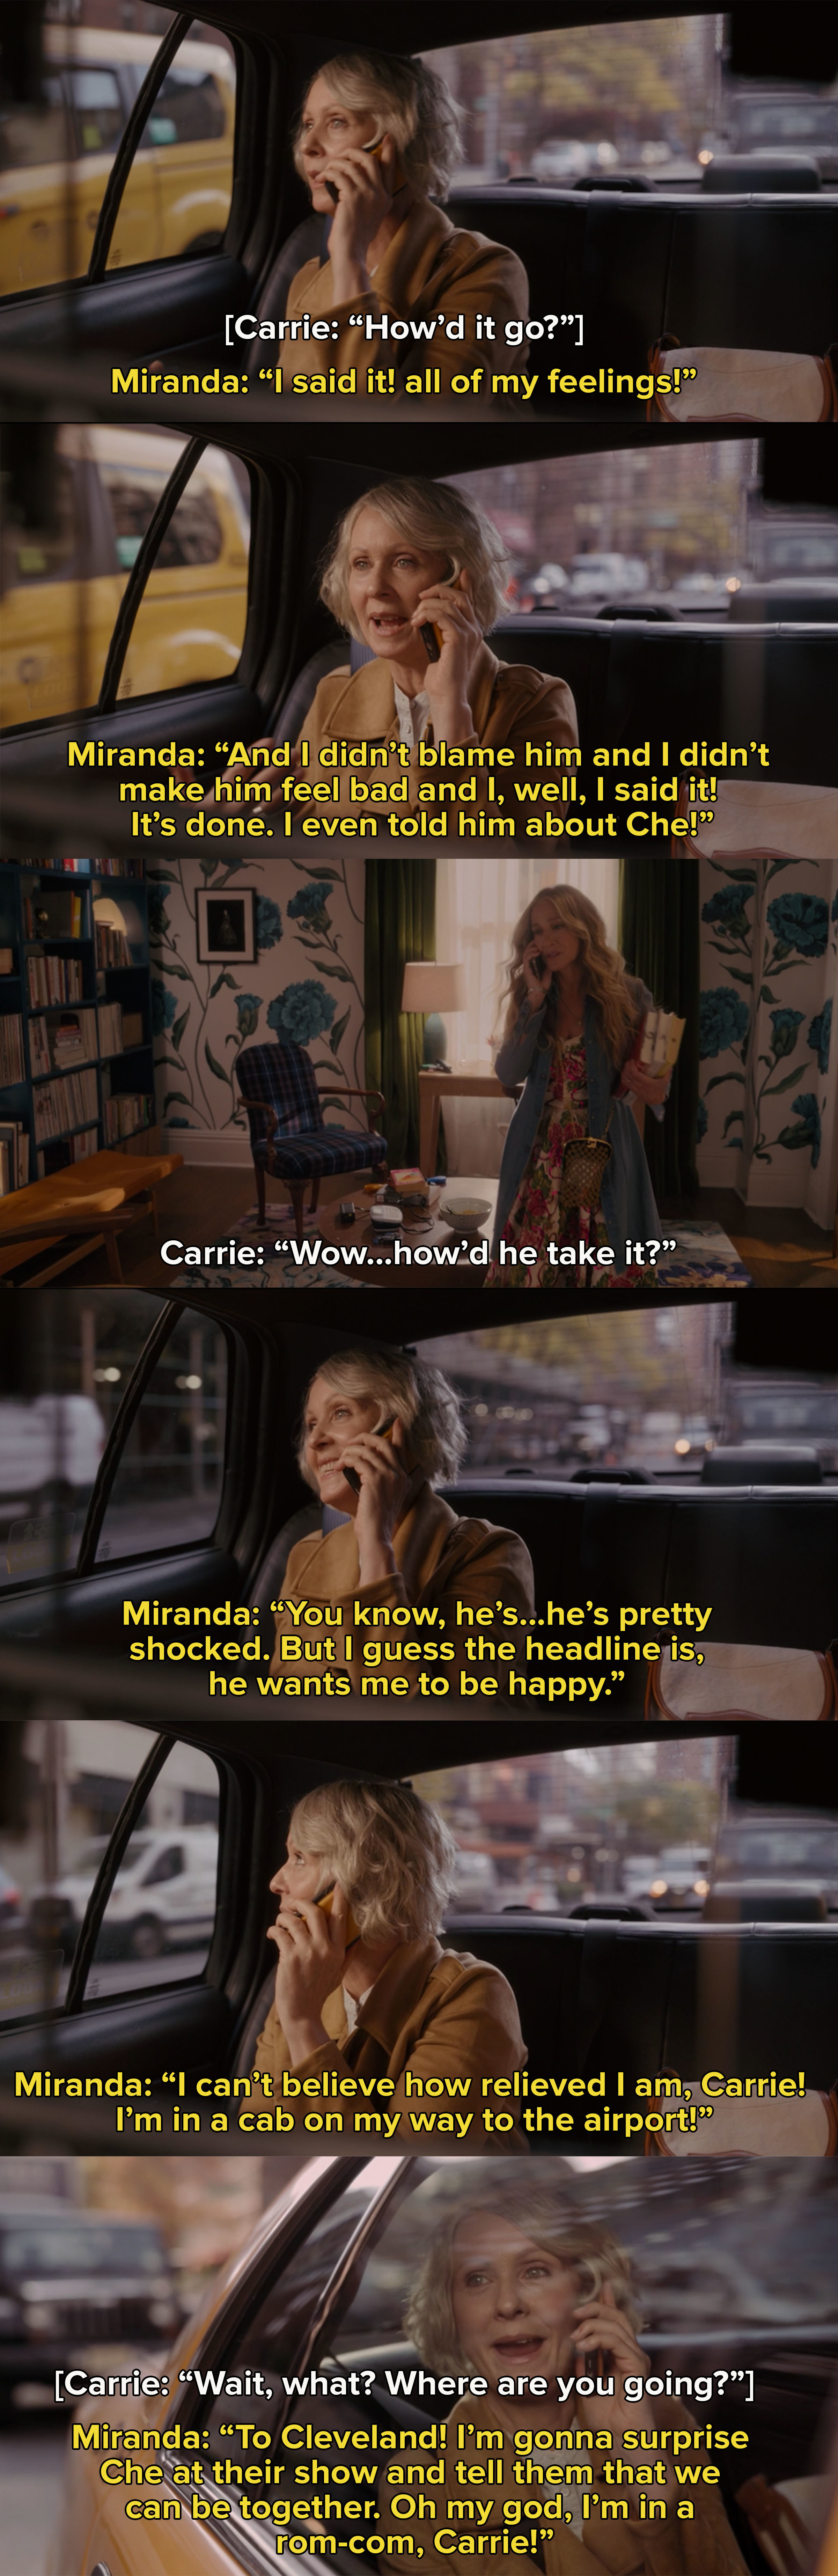 Miranda giddily calls Carrie and tells her she told Steve and that she&#x27;s so happy and relieved and on the way to the airport to surprise Che: &quot;Oh my god, I&#x27;m in a rom-com!&quot;